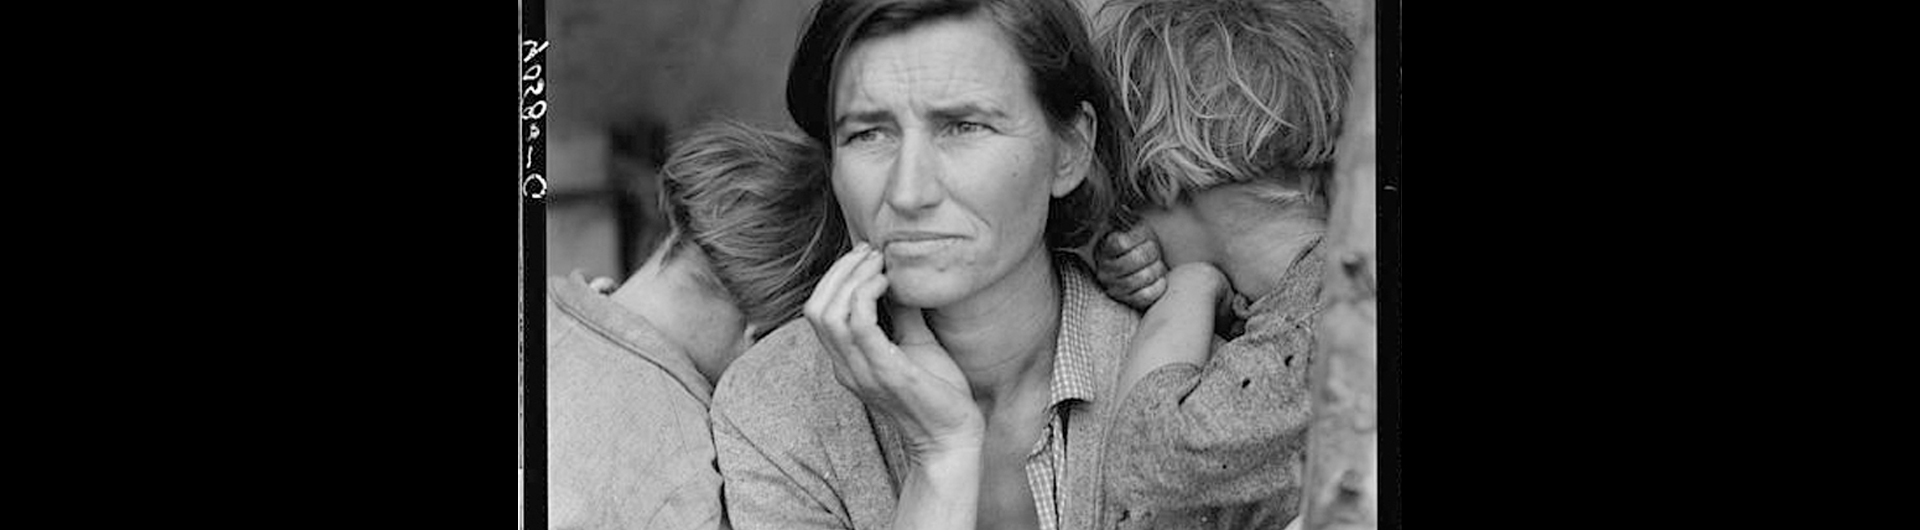 Black and white iconic photo of Migrant Mother during the Great Depression by Dorothea Lange